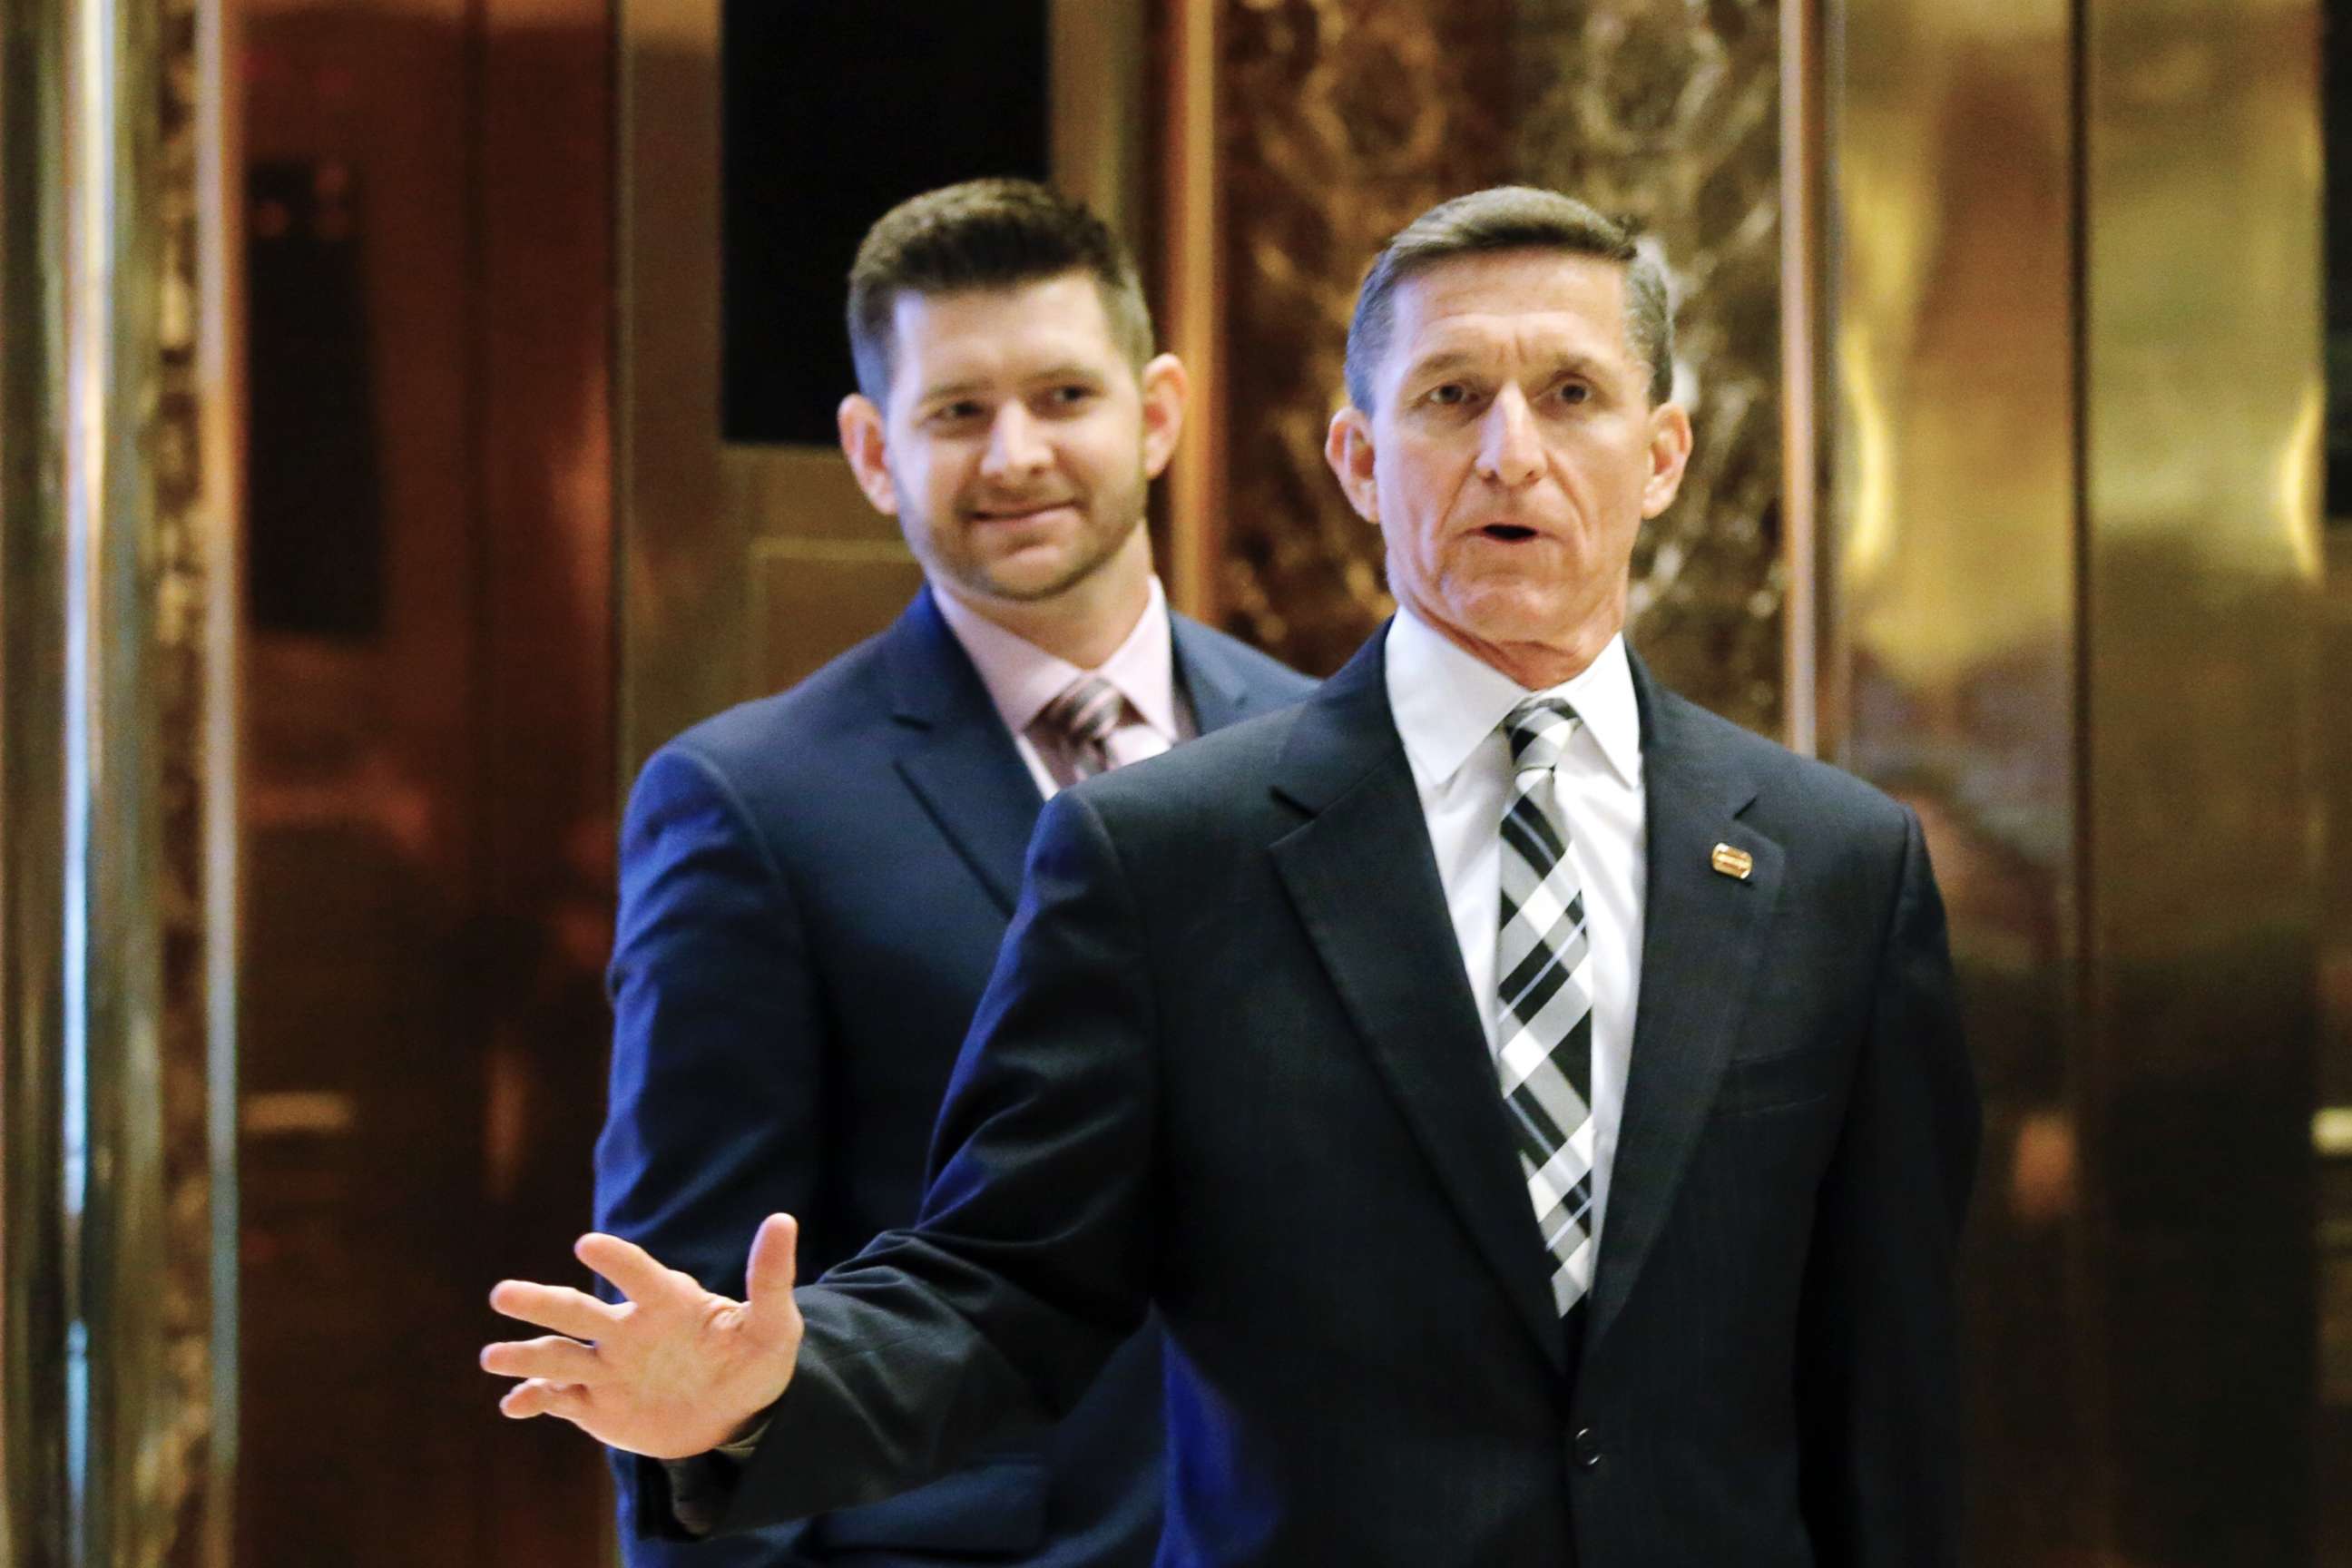 PHOTO: Michael Flynn Jr. is seen behind his father, retired Lt. Gen. Michael Flynn, as they arrive at Trump Tower in New York on Nov. 17, 2016.   